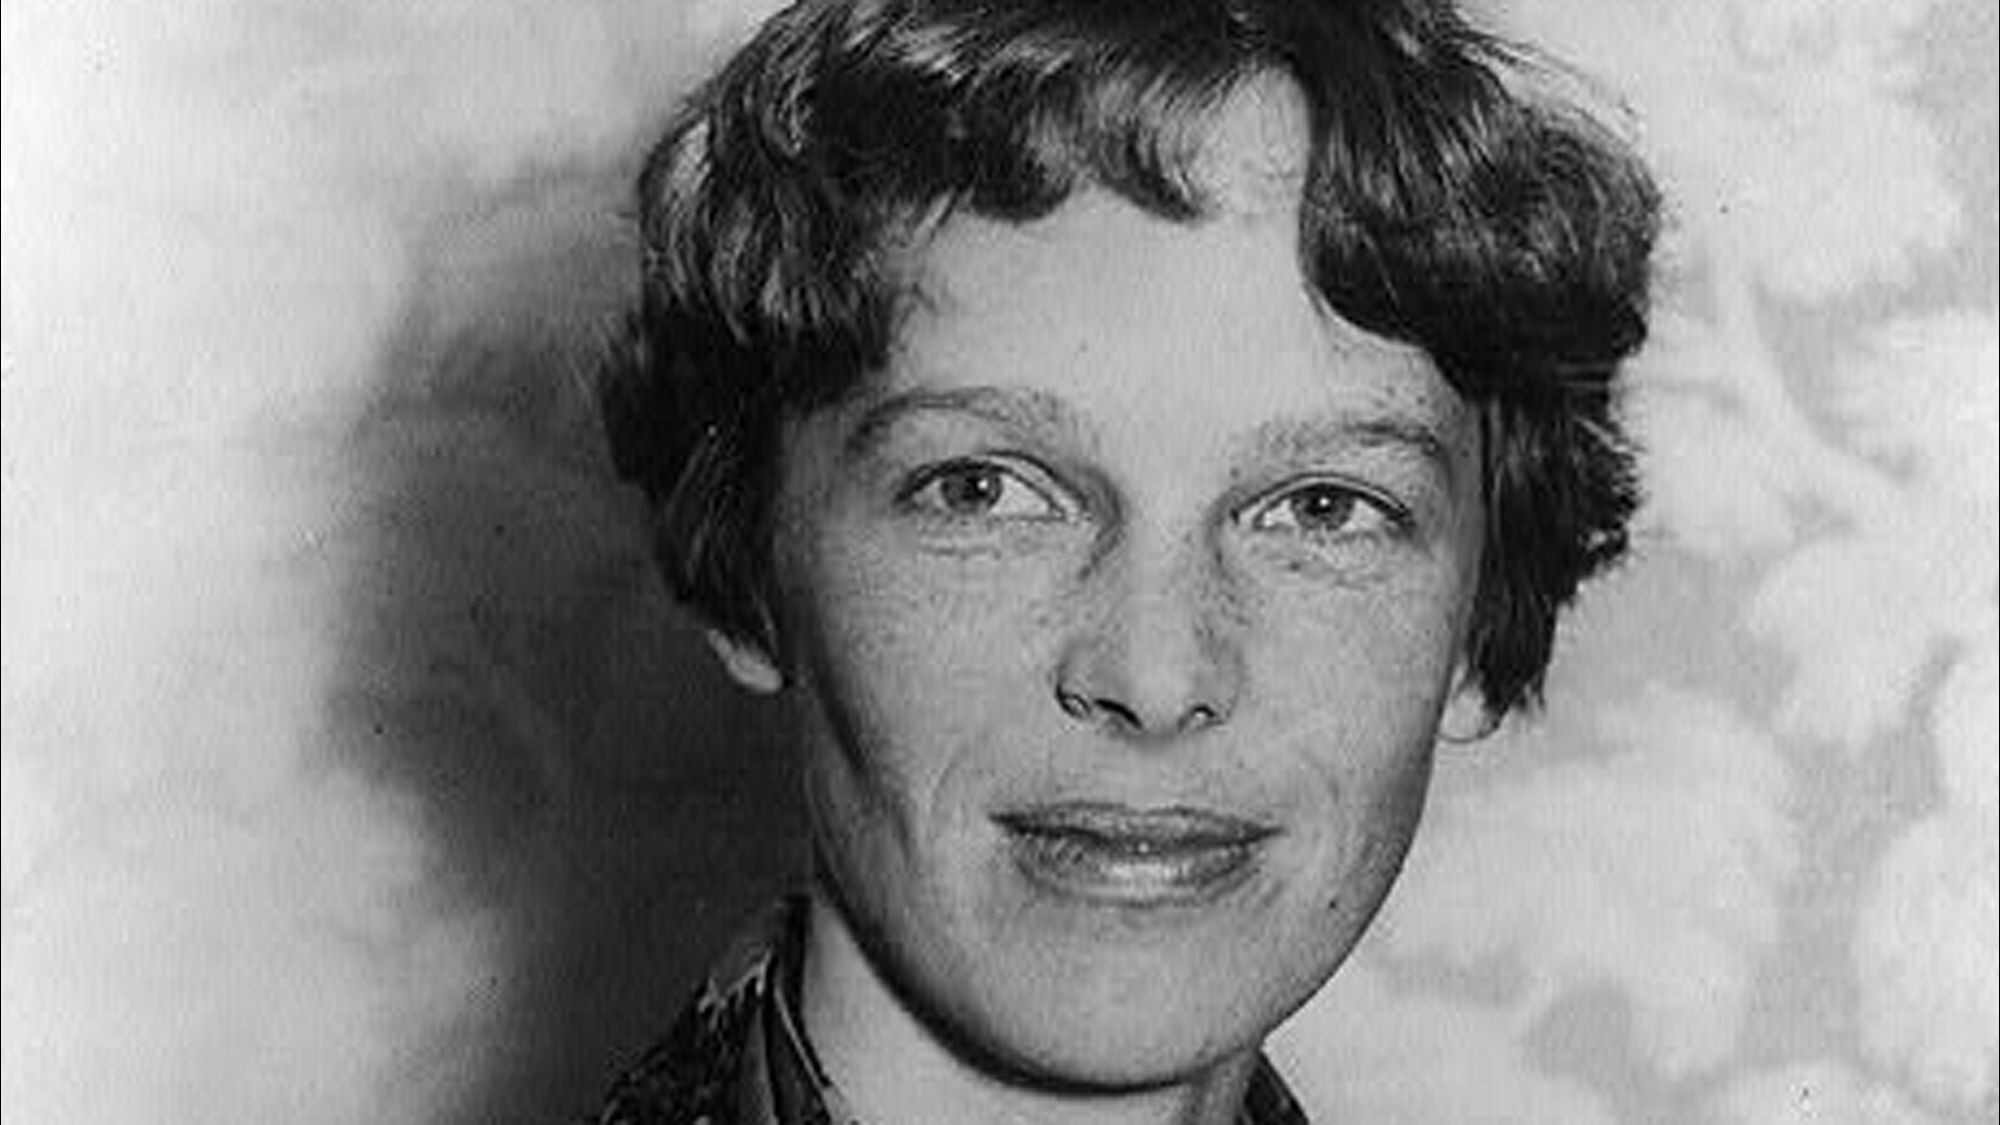 Amelia Earhart, a renowned aviator, vanished in 1937 during her global flight attempt. Contrary to popular belief, her plane landed on a Pacific island, and radio transmissions were received for days. The U.S. Navy dismissed this as a hoax without investigating. Recent findings suggest she survived on the uninhabited island for months, evading detection, possibly consumed by the island's coconut crabs.